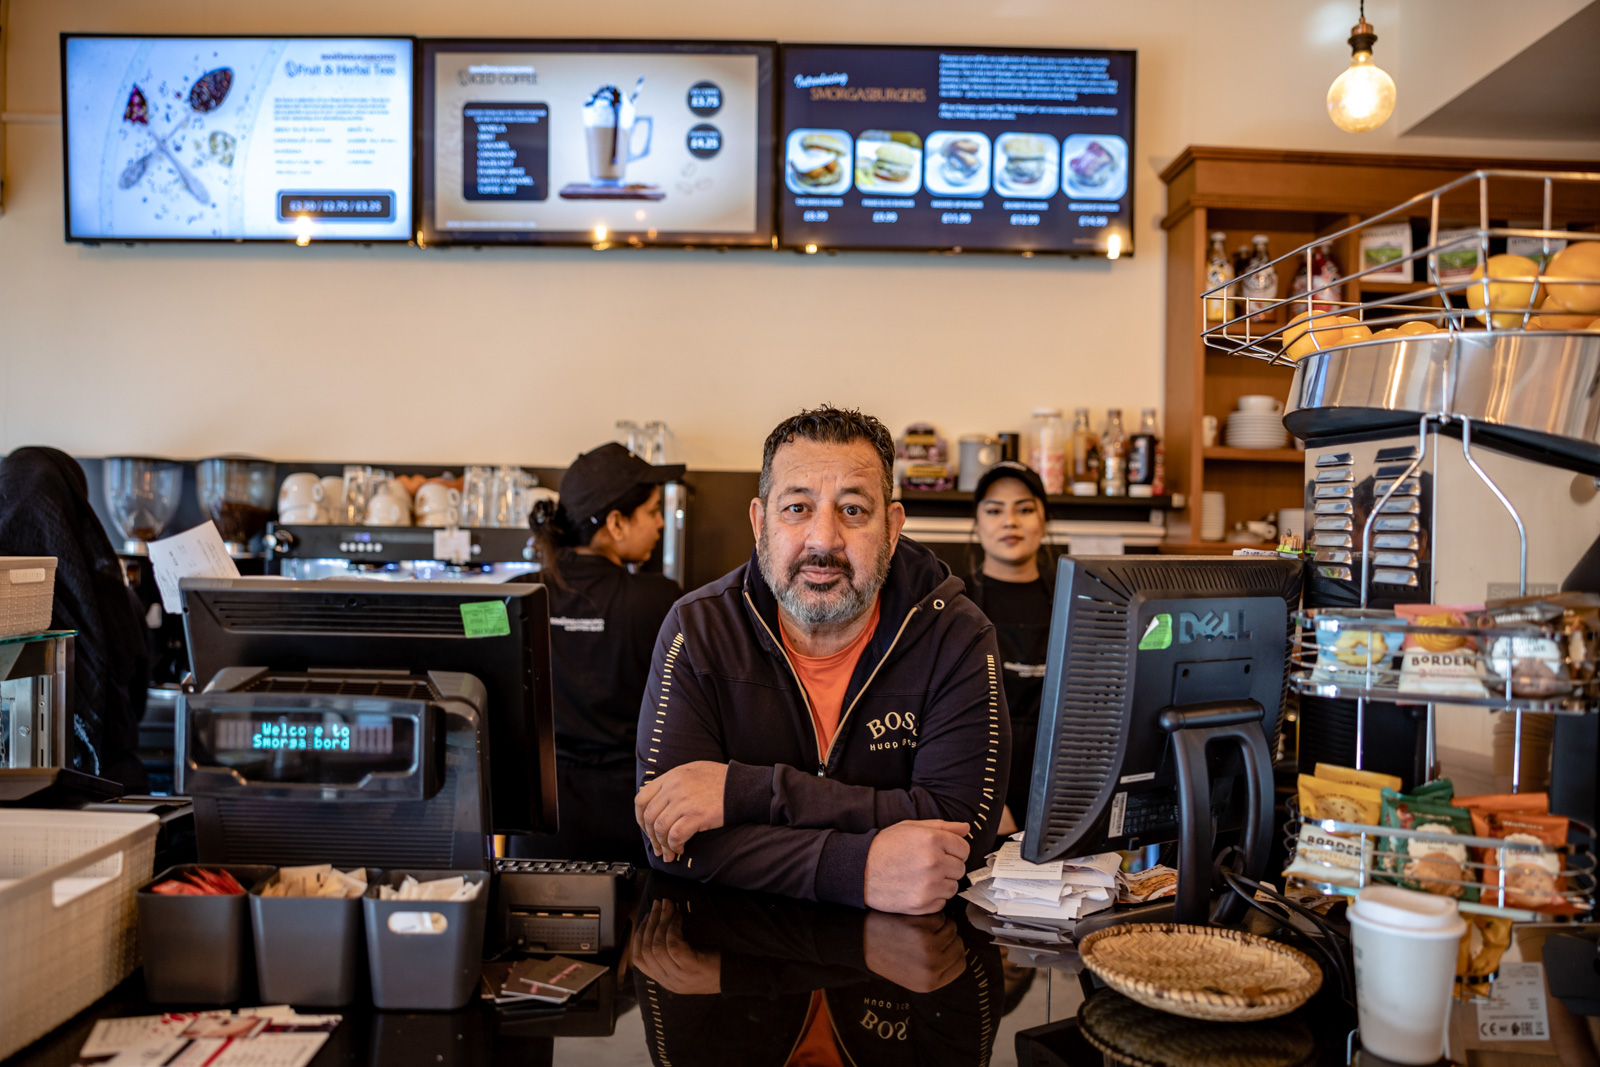 A cafe owner poses for a photo behind the till.